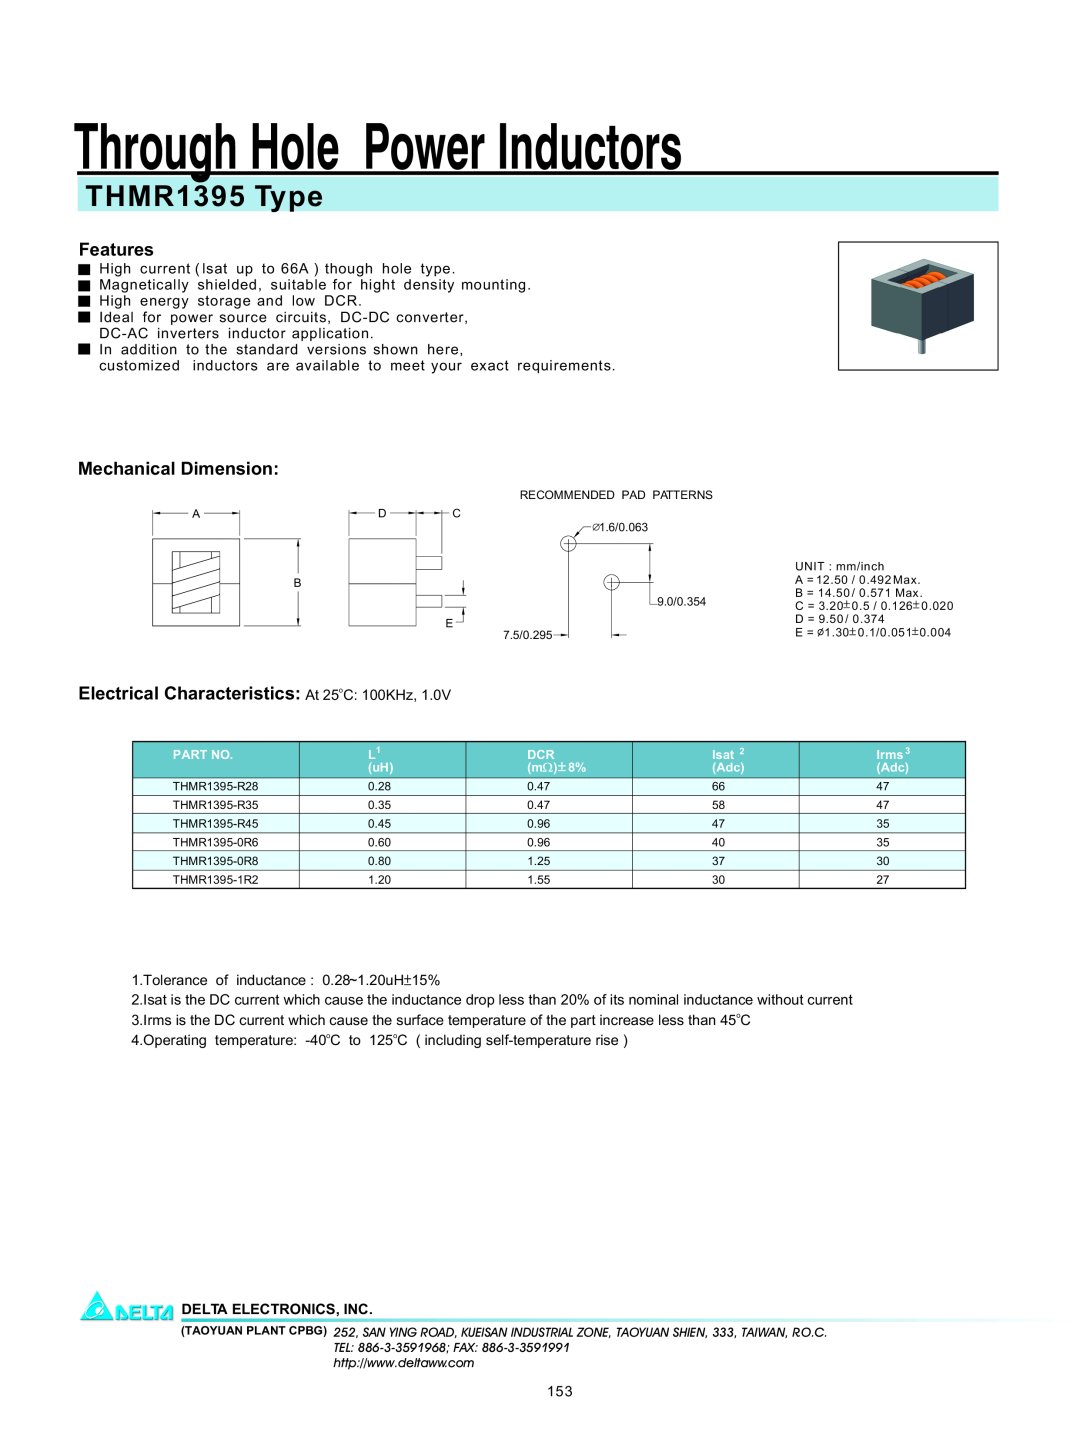 Delta Electronics manual Through Hole Power Inductors, THMR1395 Type, Features, Mechanical Dimension 